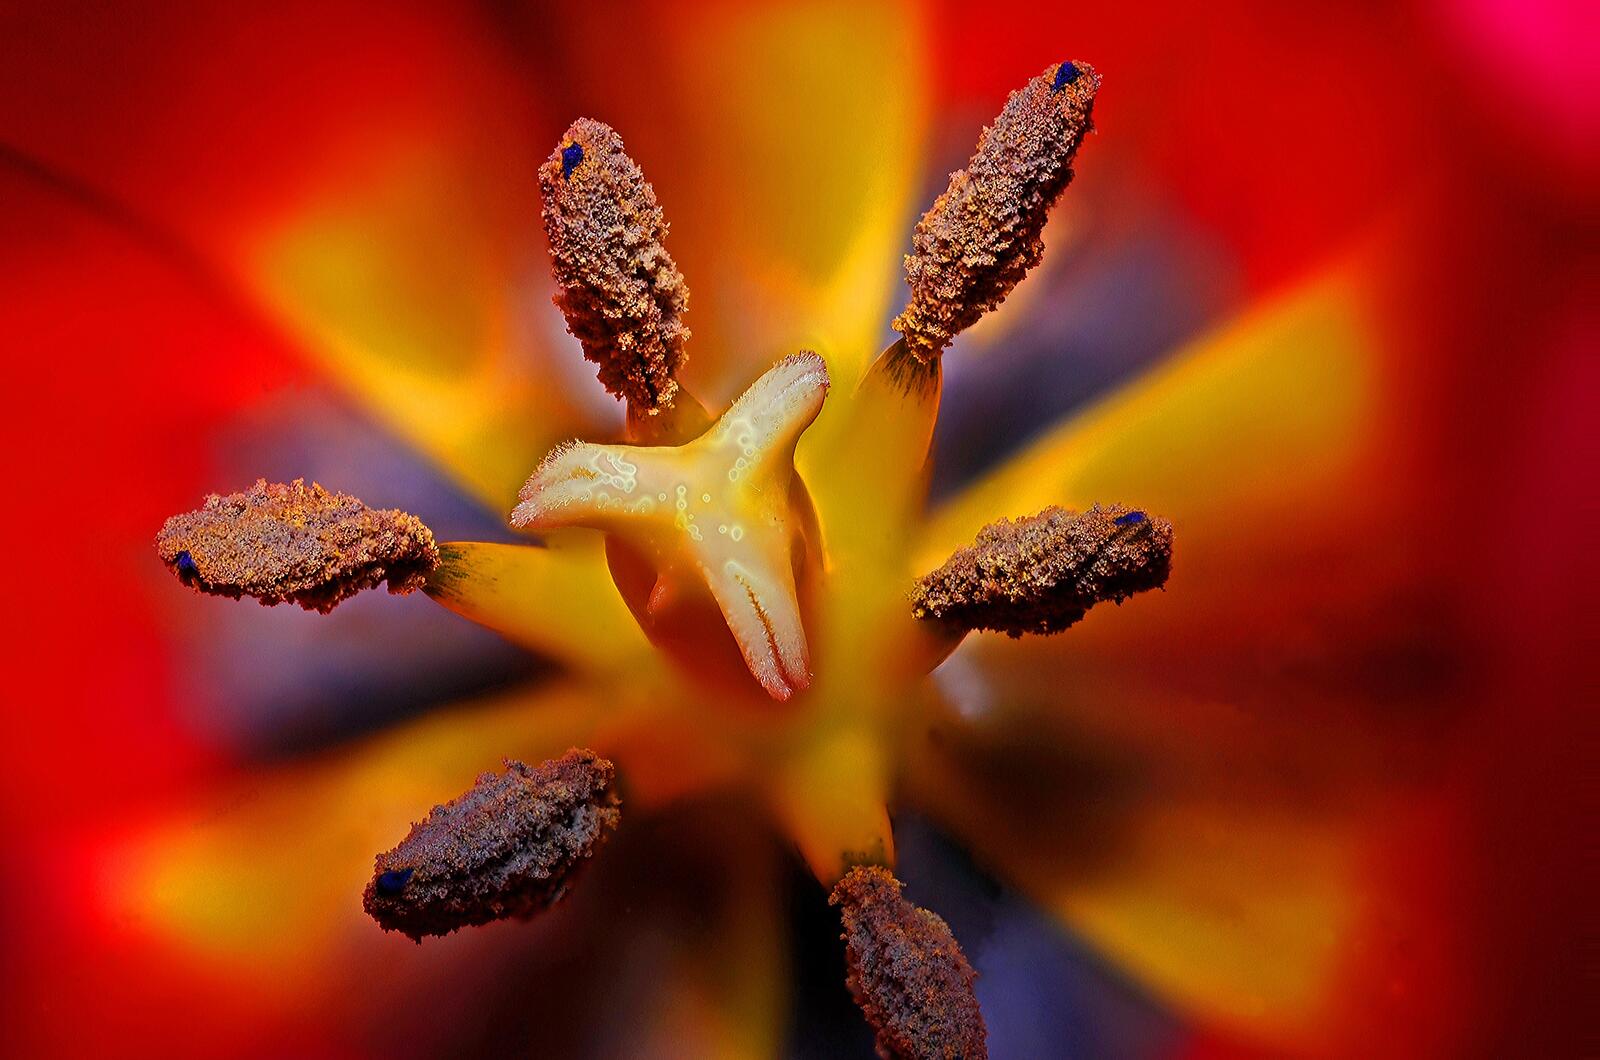 Free photo The stamen of a flower with pollen.